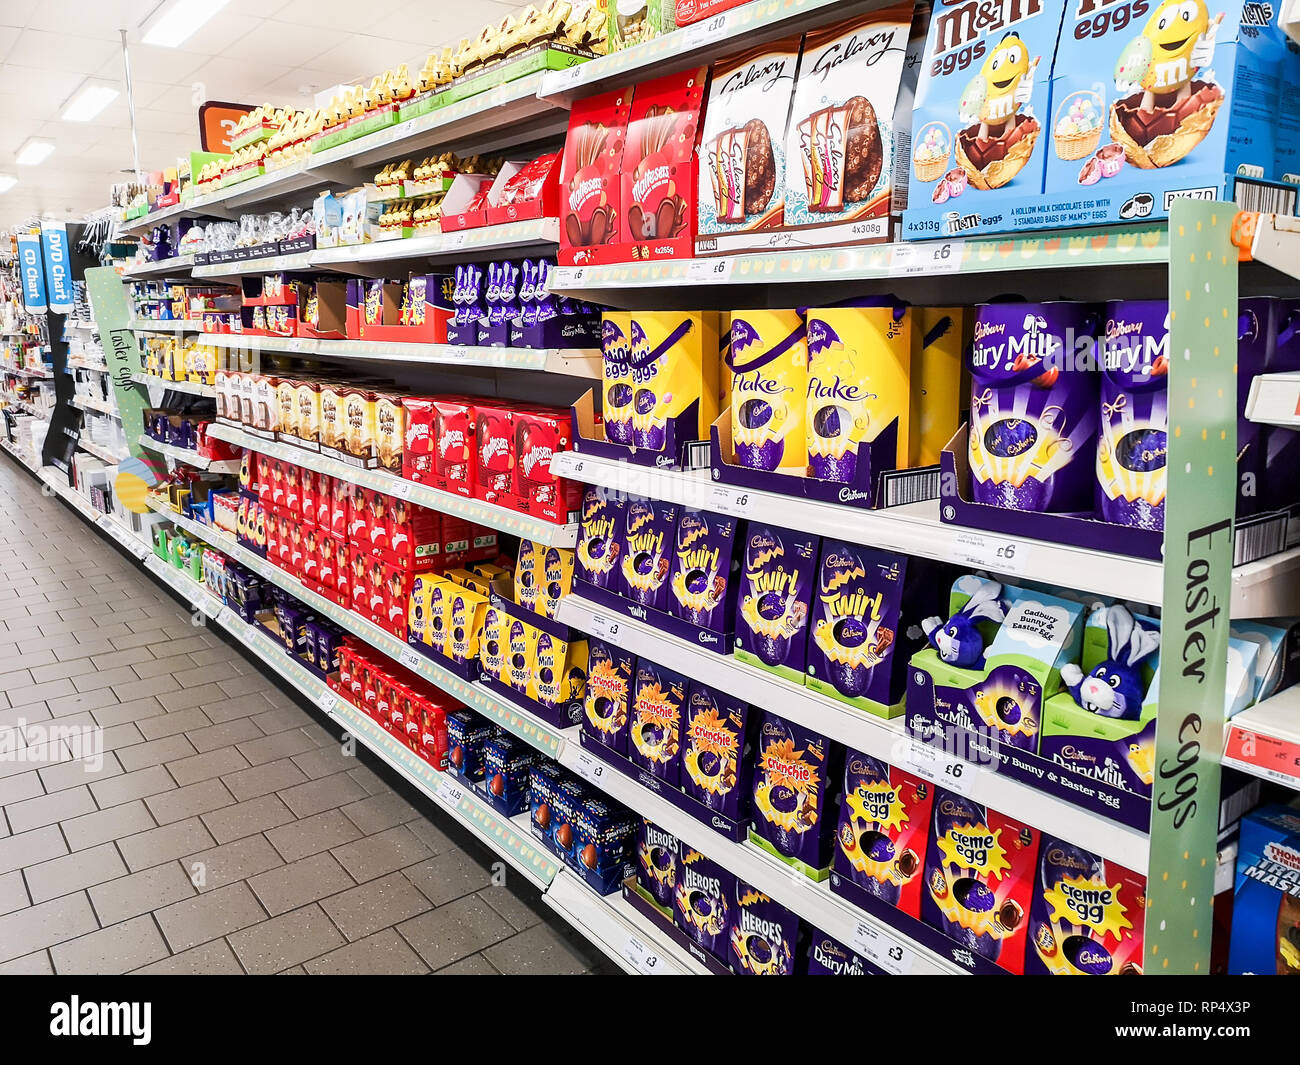 Manchester, UK - Feb 18th, 2019: Selection of different chocolate easter eggs on shelves in a shop store before the Easter holidays. Stock Photo